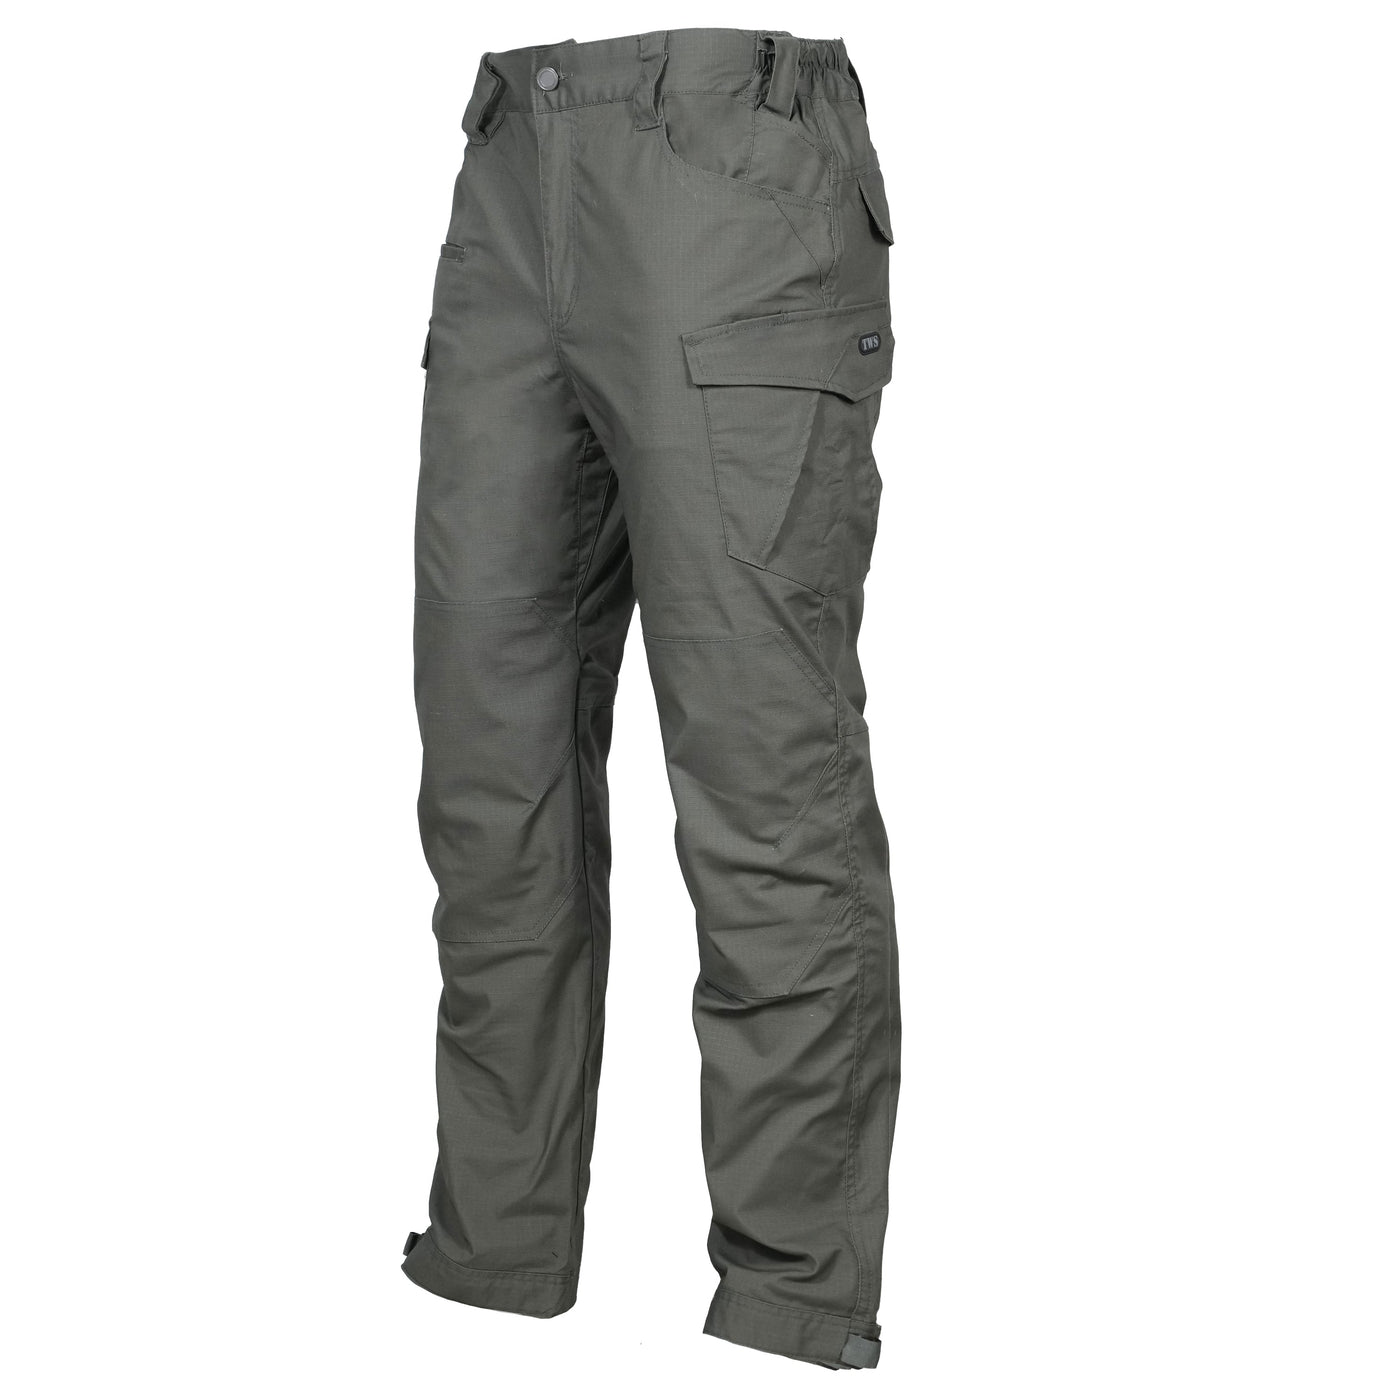 TWS Thunder Waterproof Rip-Stop Tactical Trousers